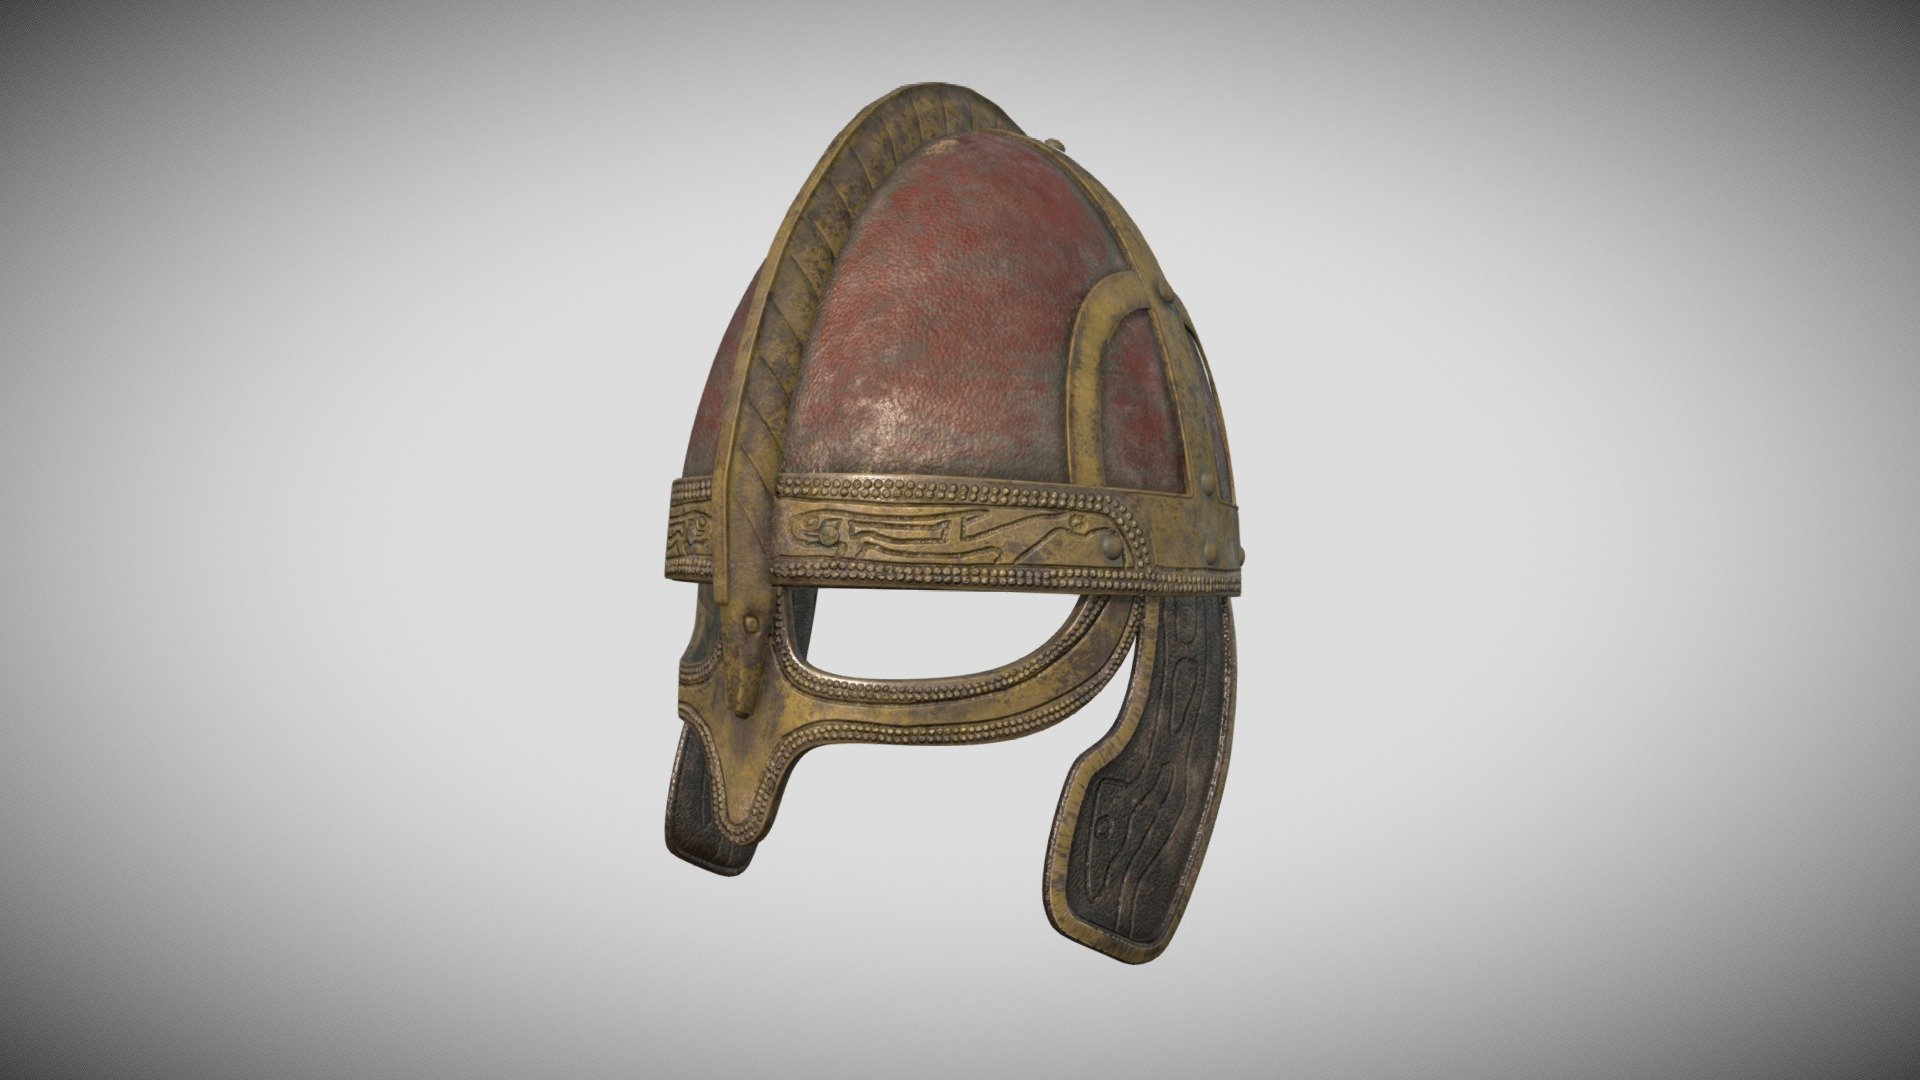 Testing out my modeling skills by recreating a helmet from the Lord of the Rings movies, used by the riders of Rohan. Modeled in Blender and textured in Substance Painter 3d model